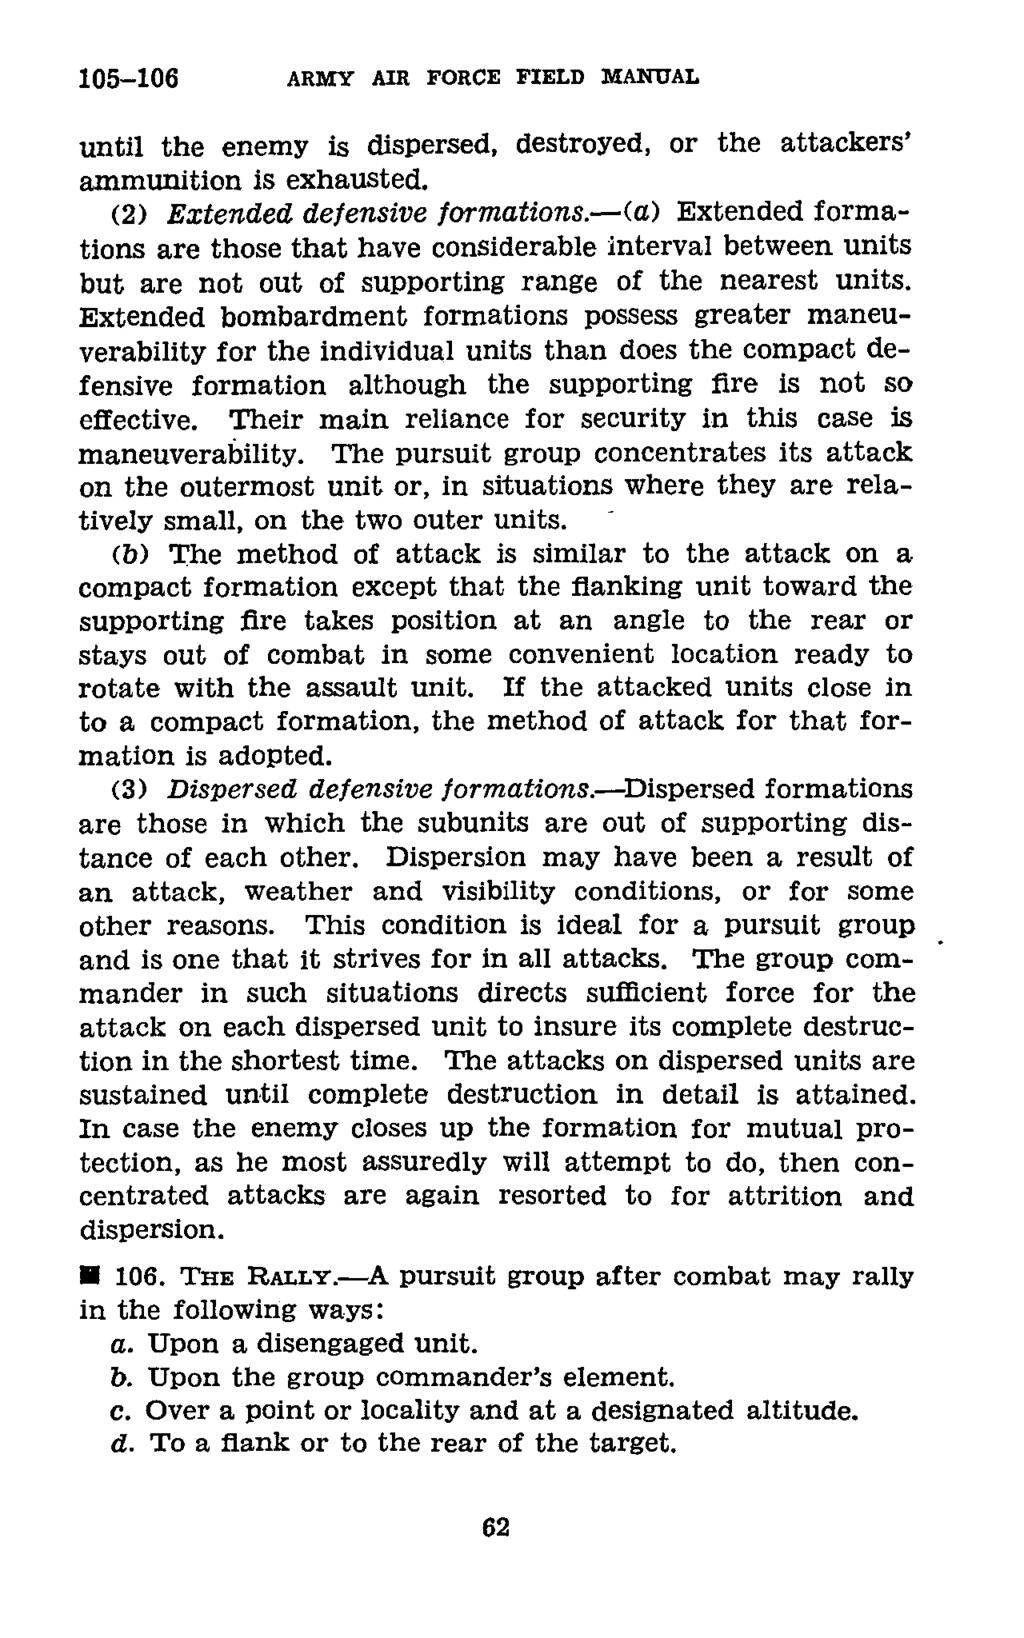 105-106 ARMY AIR FORCE FIELD MANUAL until the enemy is dispersed, destroyed, or the attackers' ammunition is exhausted. (2) Extended defensive formations.